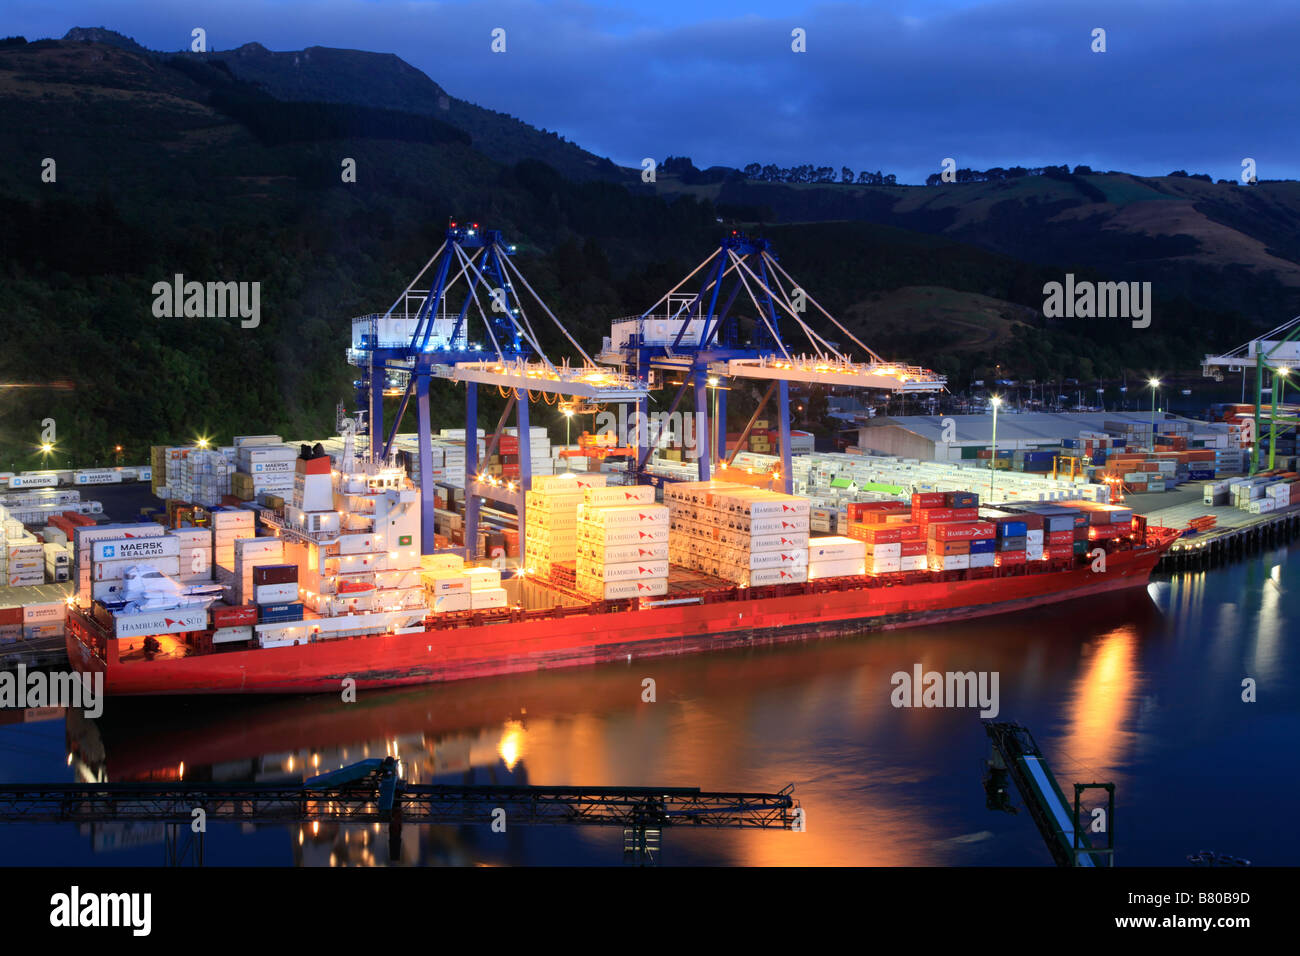 Sea Container ship docked at terminal at night,Port Chalmers, Otago Harbour, Dunedin, South Island, New Zealand Stock Photo